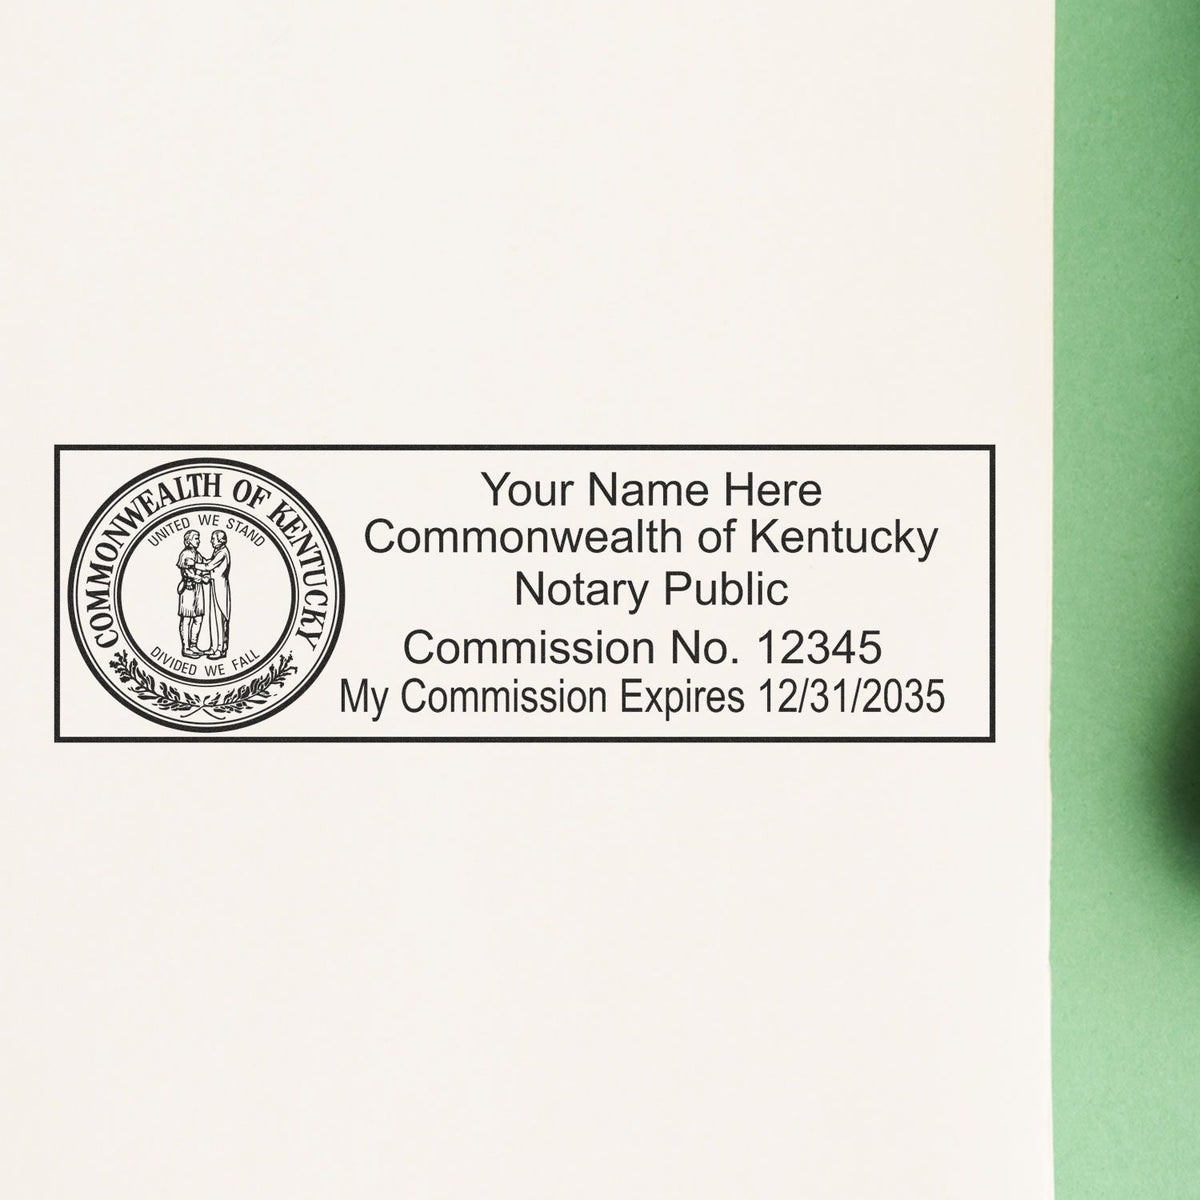 A photograph of the MaxLight Premium Pre-Inked Kentucky State Seal Notarial Stamp stamp impression reveals a vivid, professional image of the on paper.